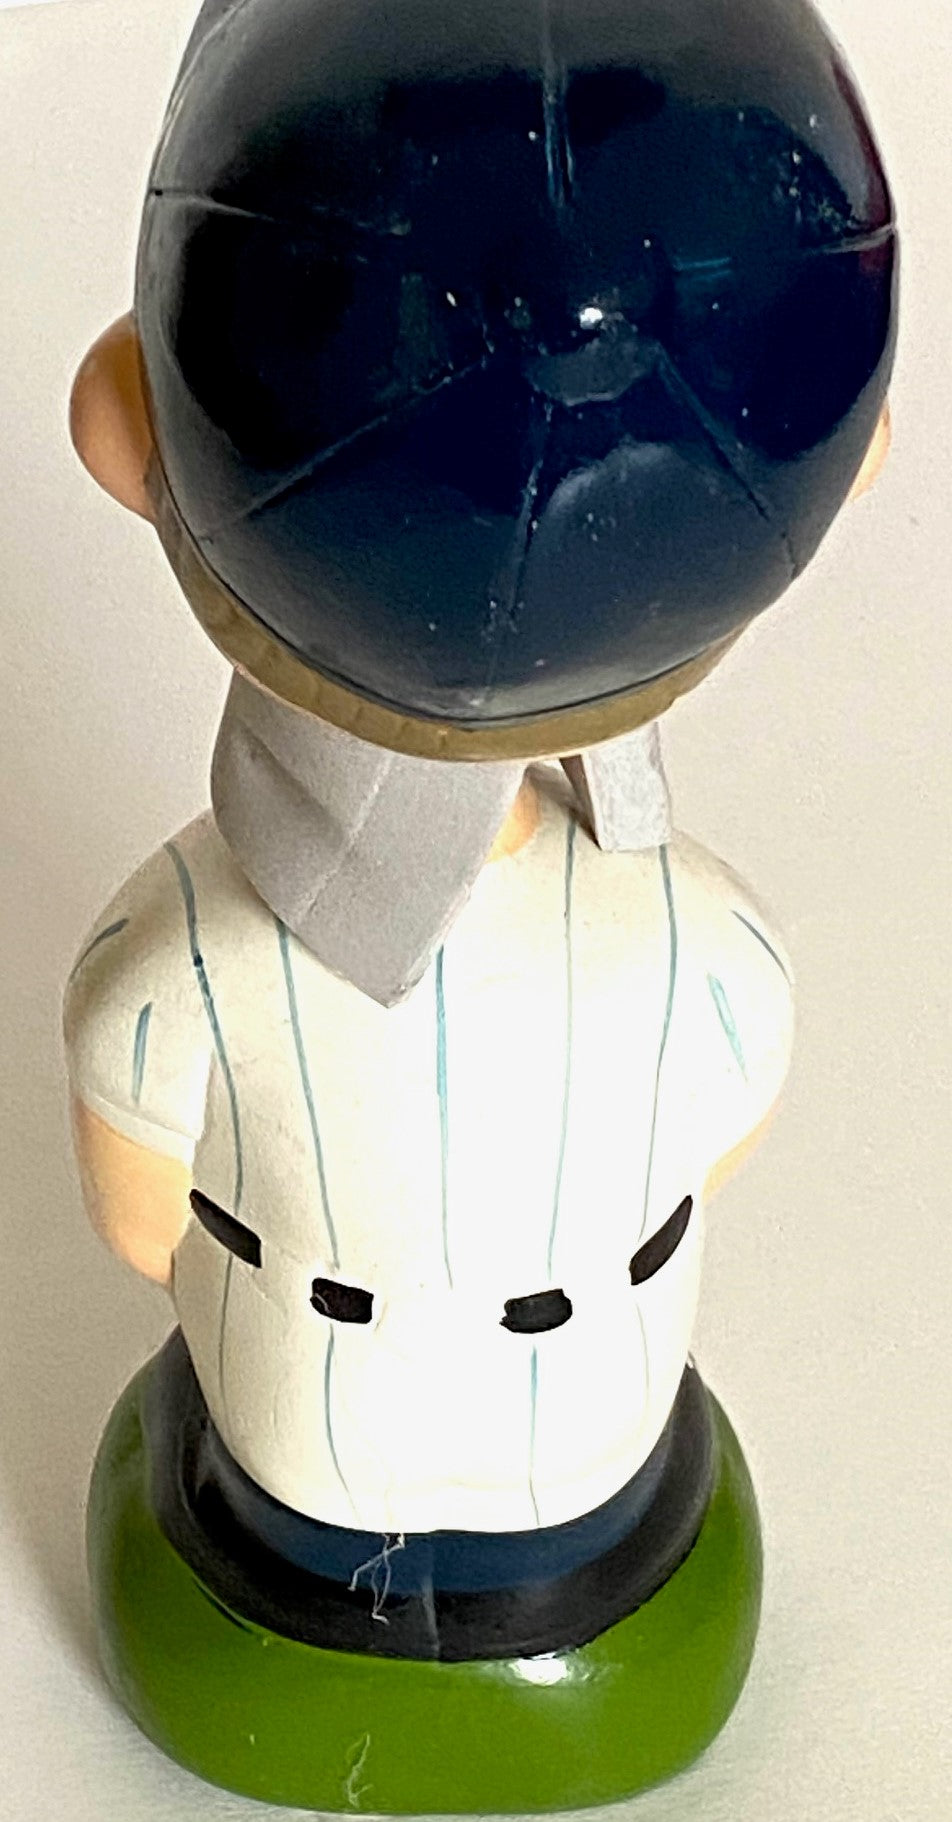 Mobile BayBears 1999  Minor League Bobblehead (Used) by Twins Enterprise